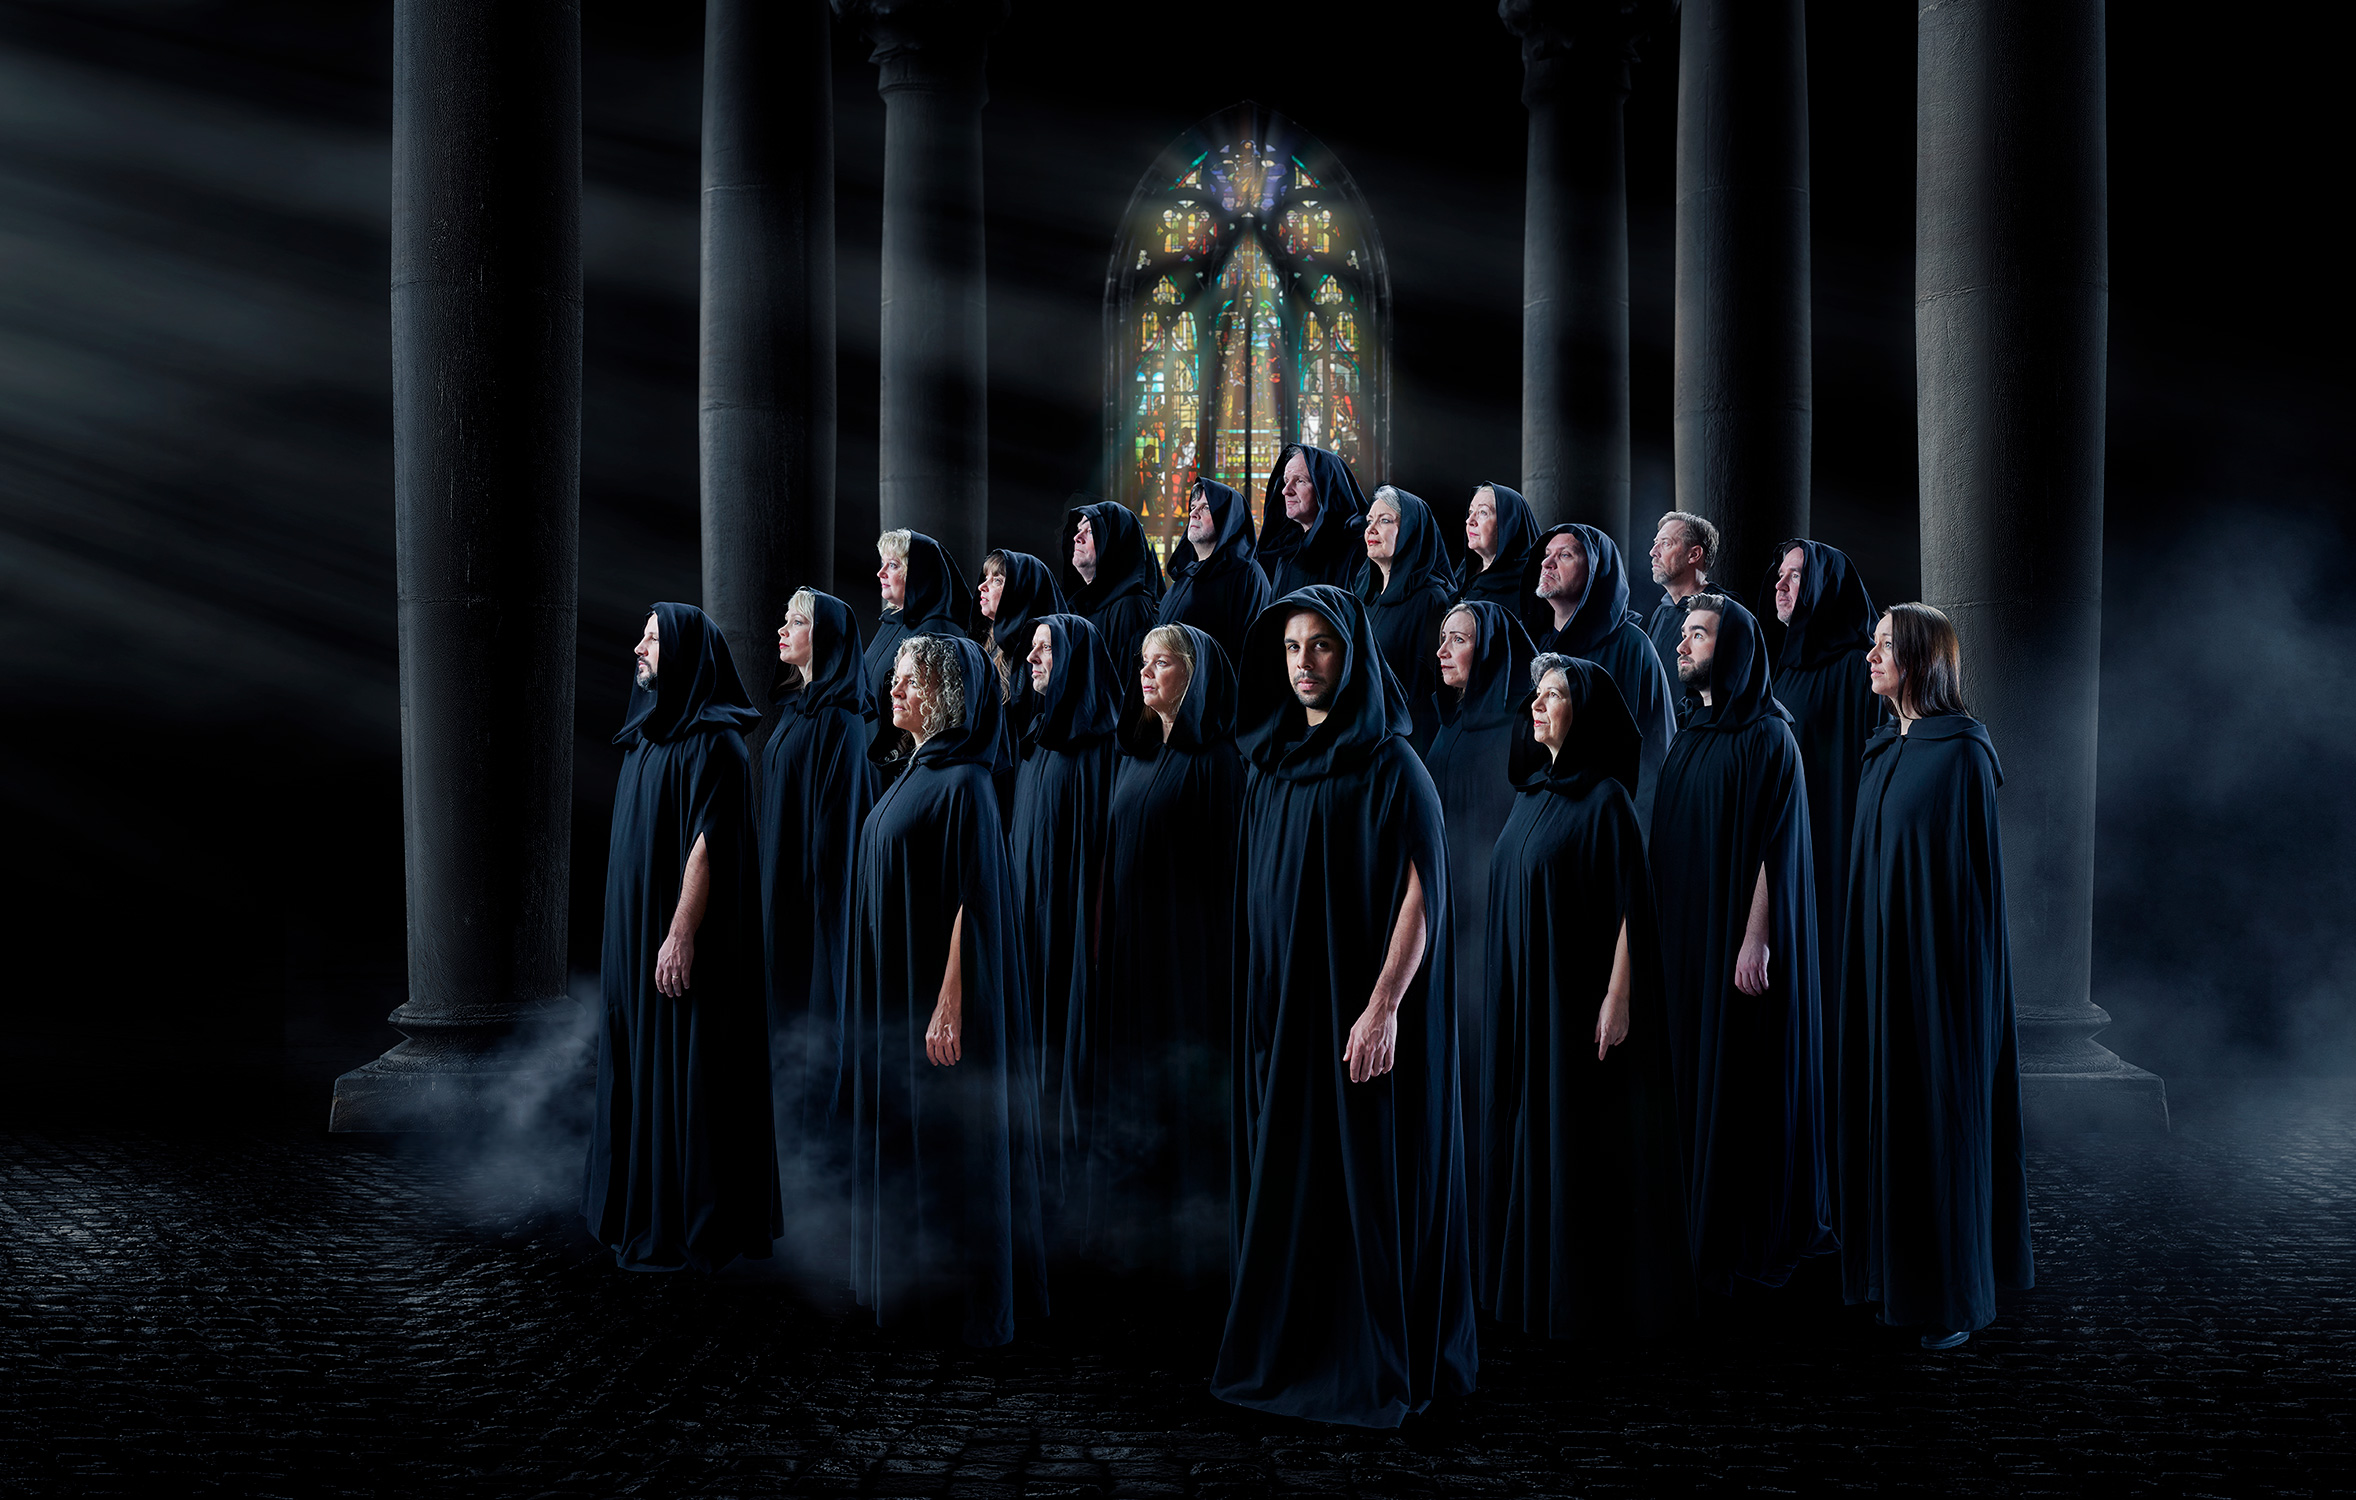 A choir dressed in black robes, standing in front of tall pillars and a colorful church window in the background. The atmosphere is dark and mysterious, and it appears they are located in a cathedral. Fog or smoke is visible at their feet, reinforcing the enigmatic mood in the image.